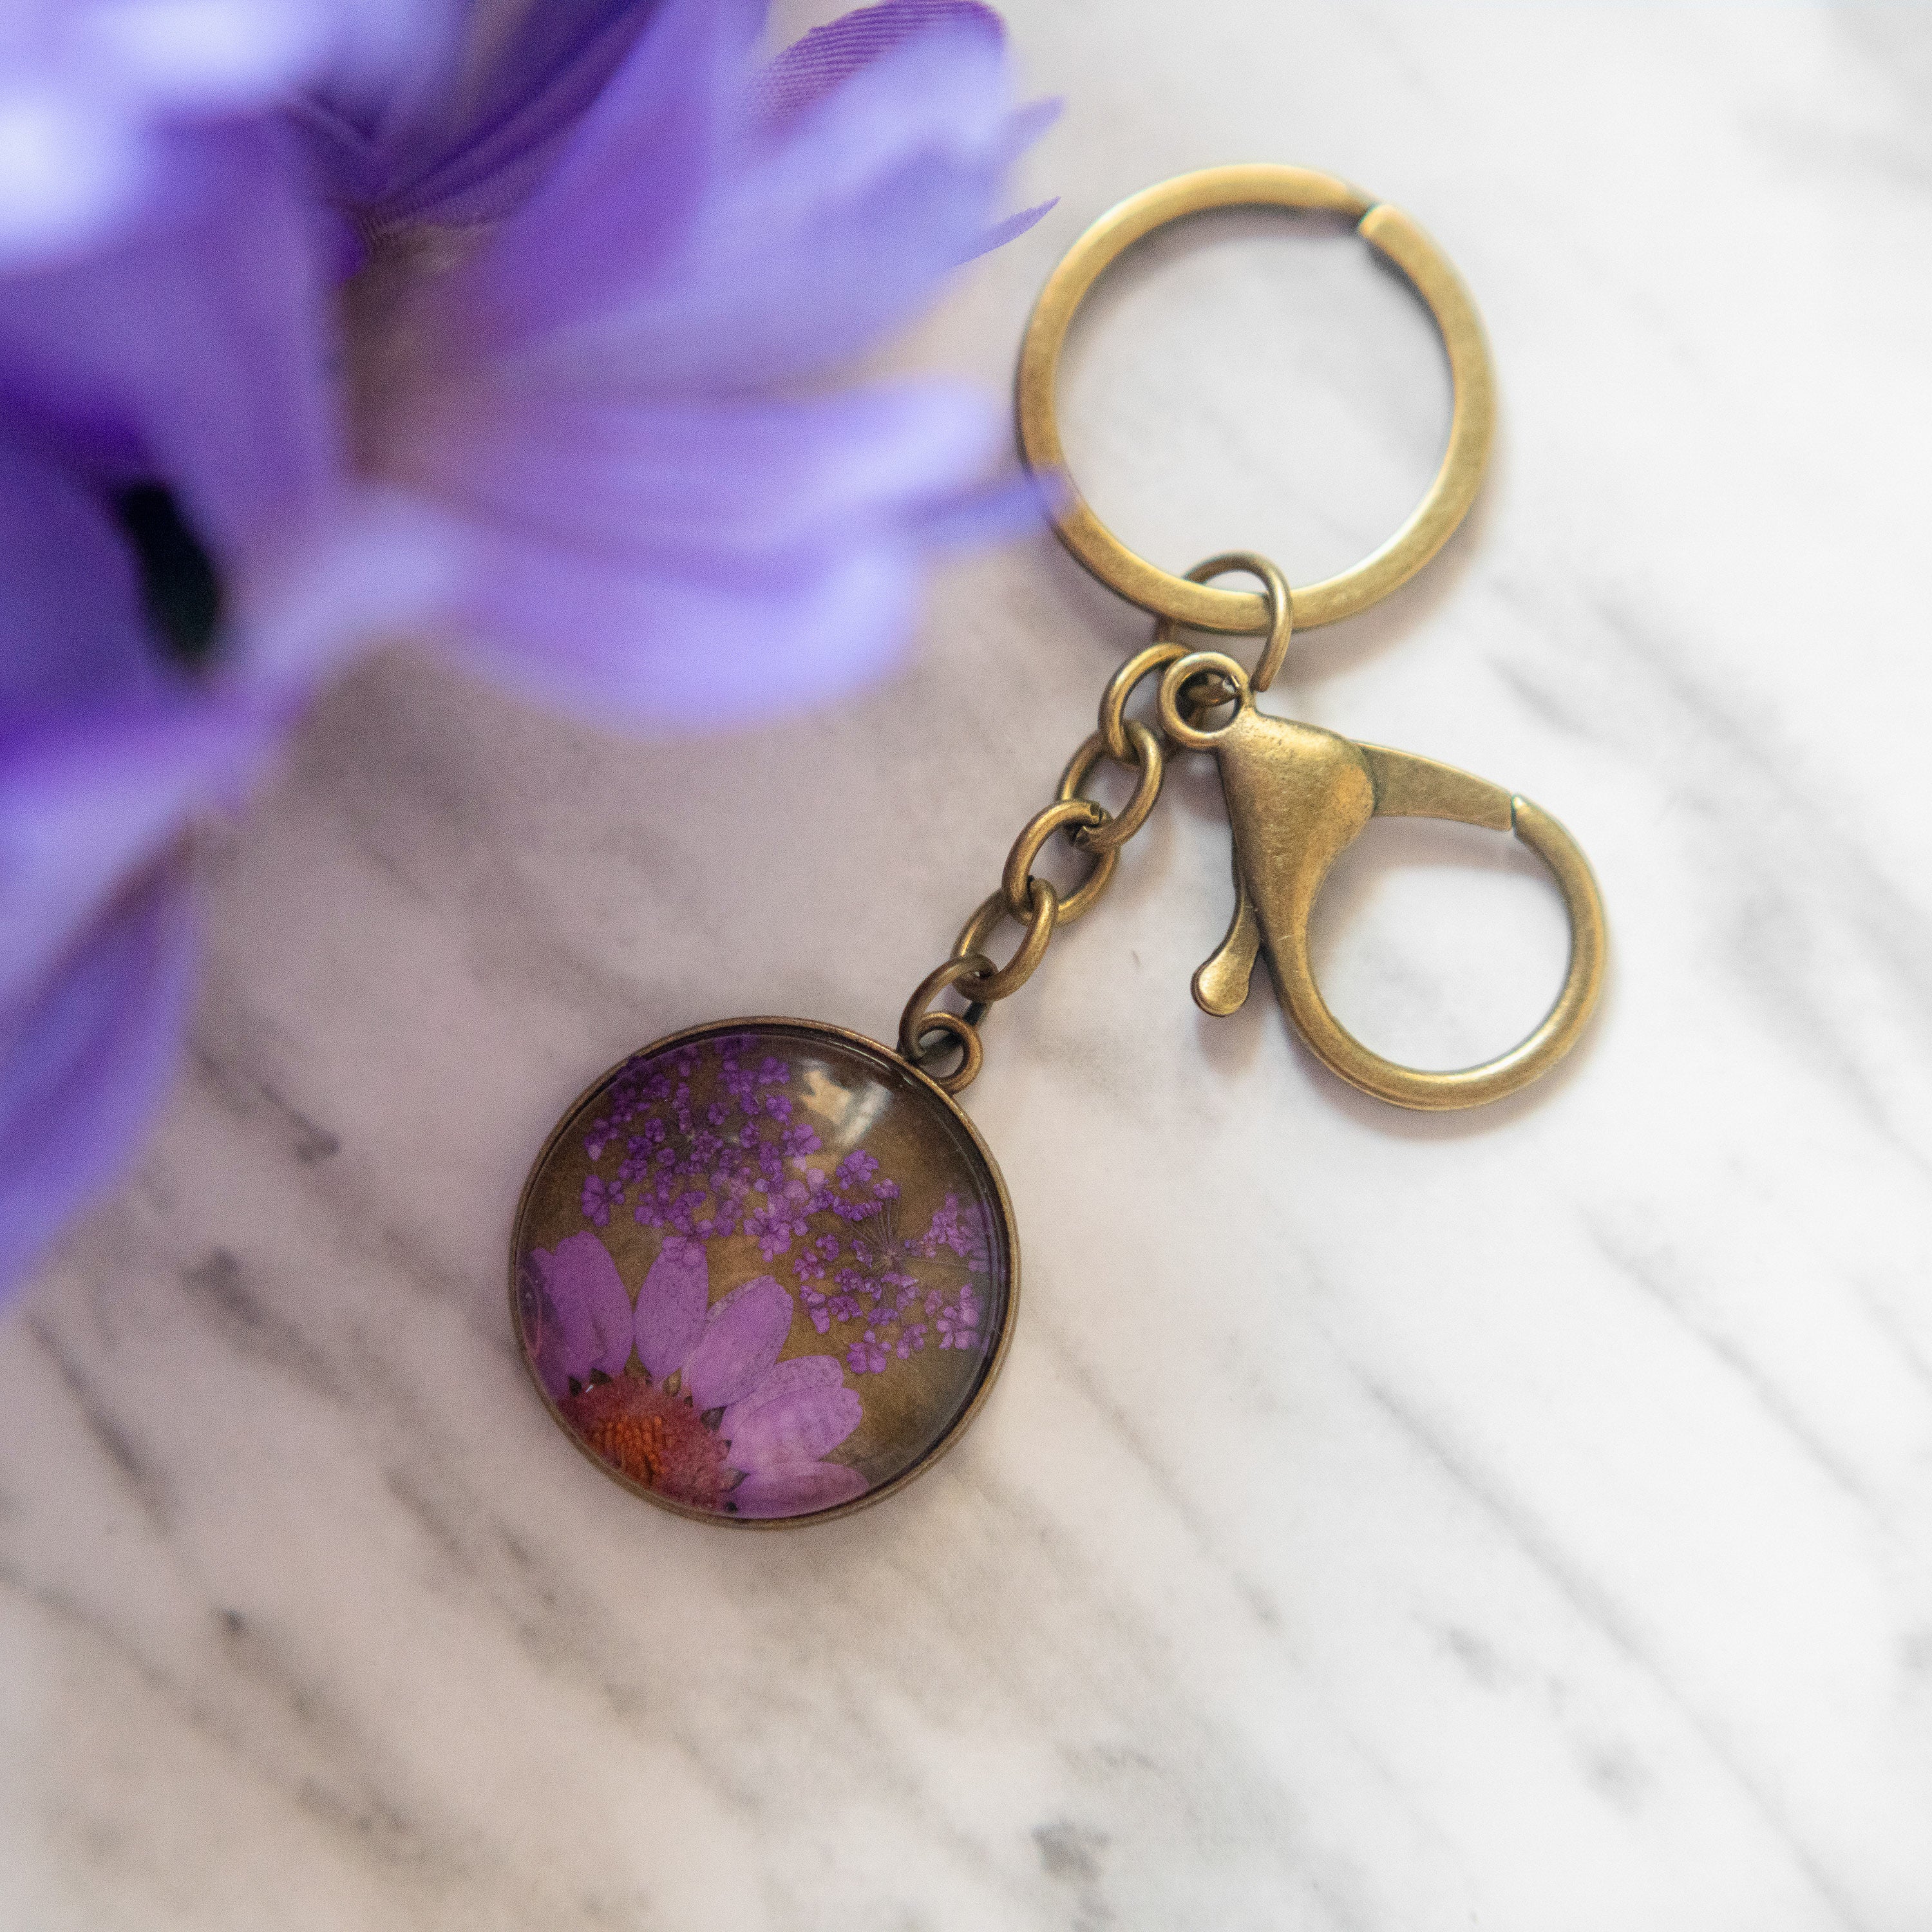 Real Pressed Flower Resin Keychain with Daisy and Lace Floral Neverland Floralfy 08